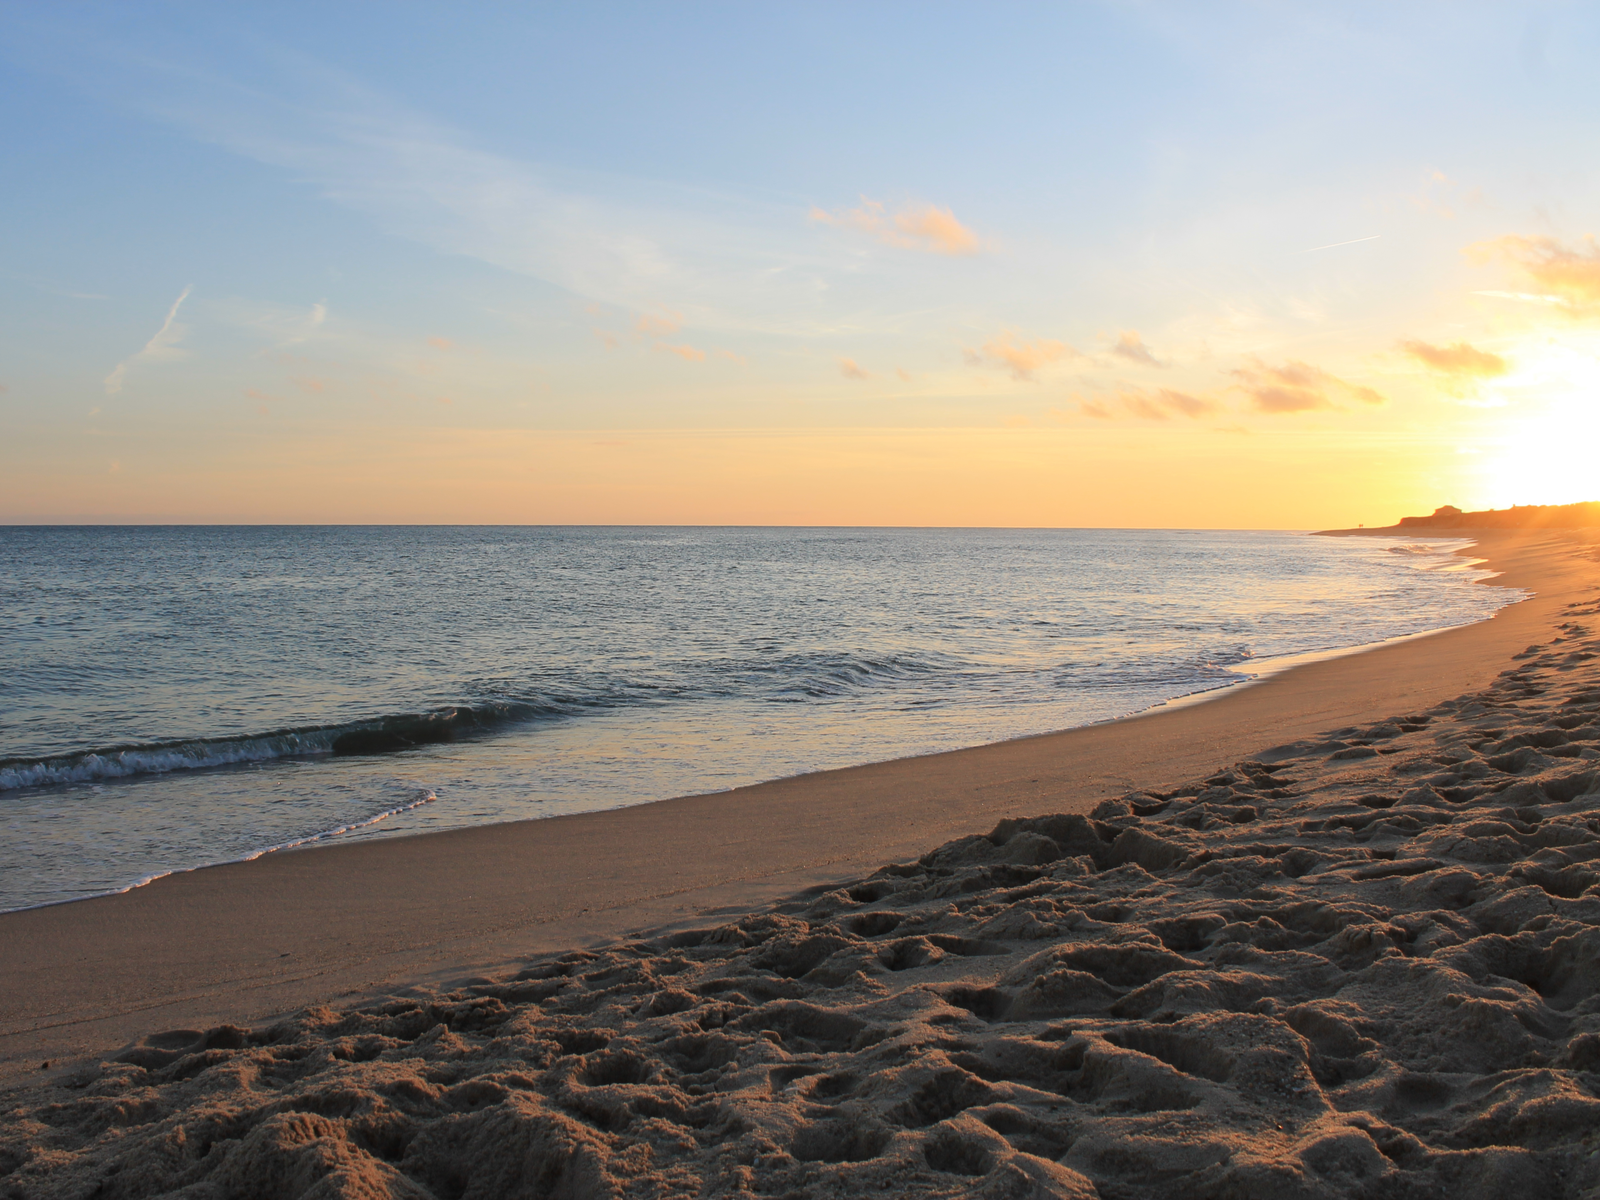 Beautiful sunrise over the calm Cisco Beach on Nantucket Island in Massachusetts, one of the best beaches on the East Coast, with sands walked on by many visitors